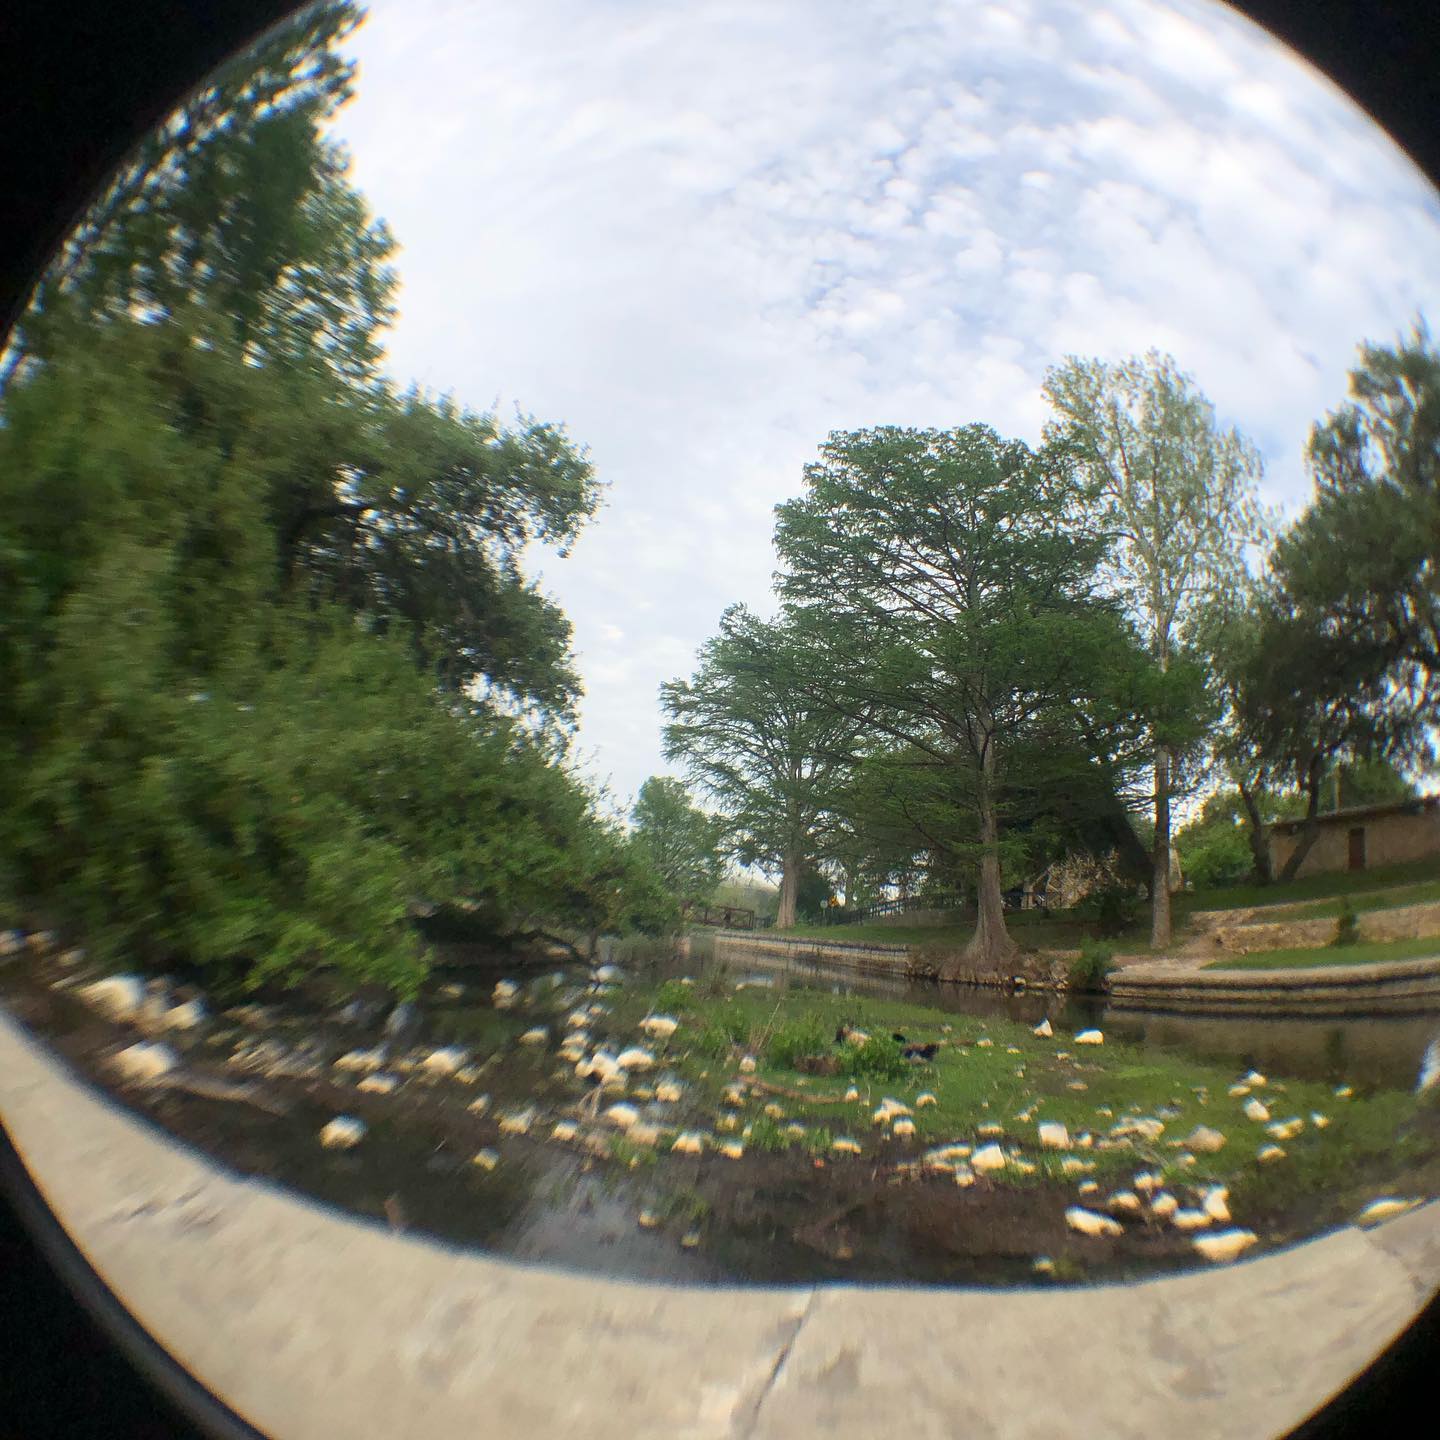 I am completely normal and can be trusted with a fisheye lense attachment for my smartphone